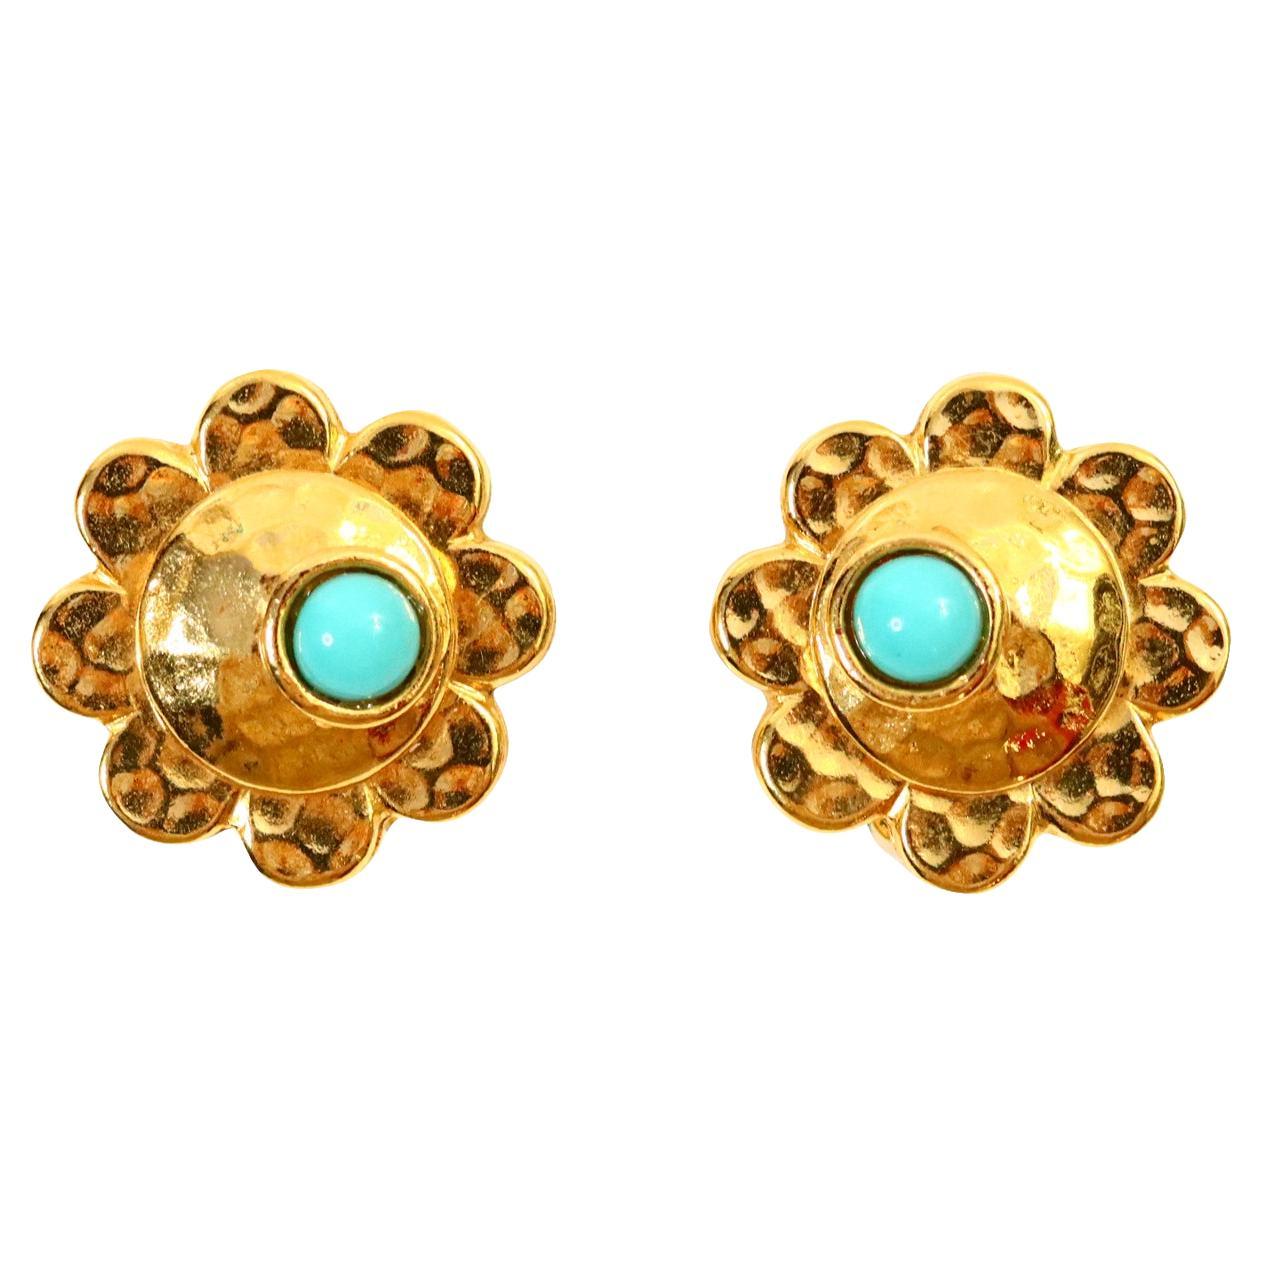 Vintage Carita Paris Gold with Faux Turquoise Earrings, Circa 1980s